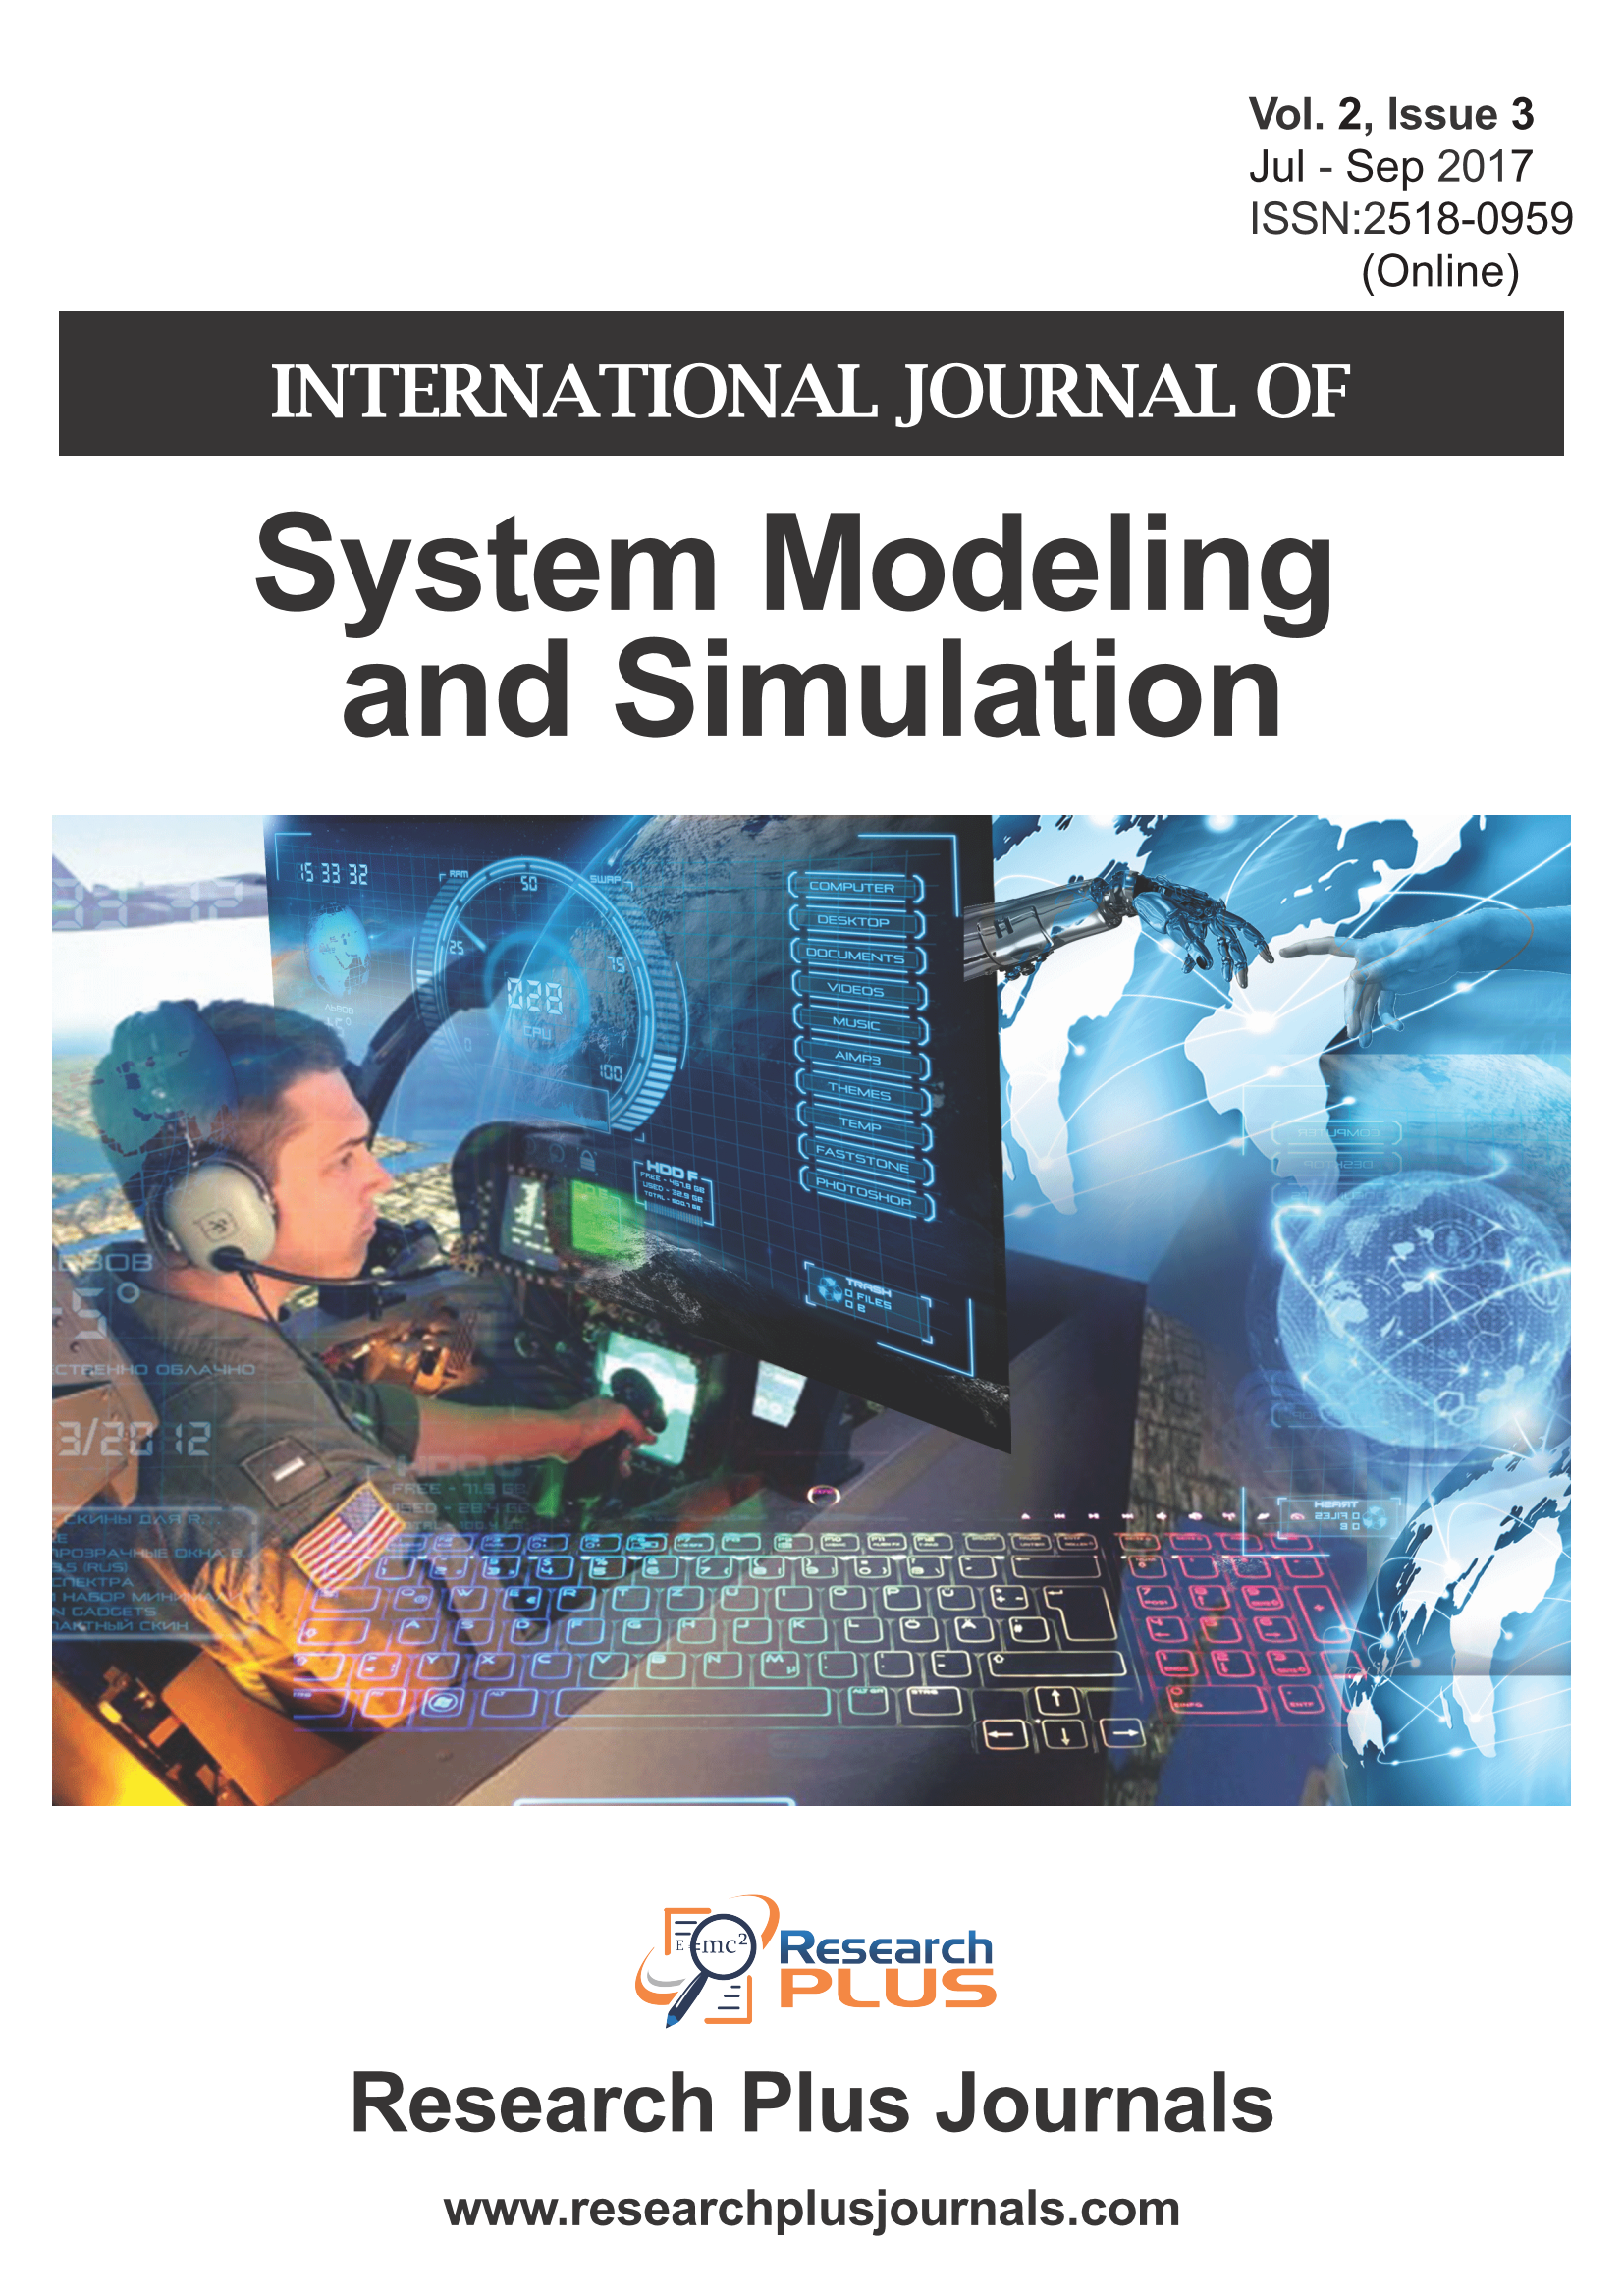 Volume 2, Issue 3, International Journal of System Modeling and Simulation (IJSMS)  (Online ISSN: 2518-0959)